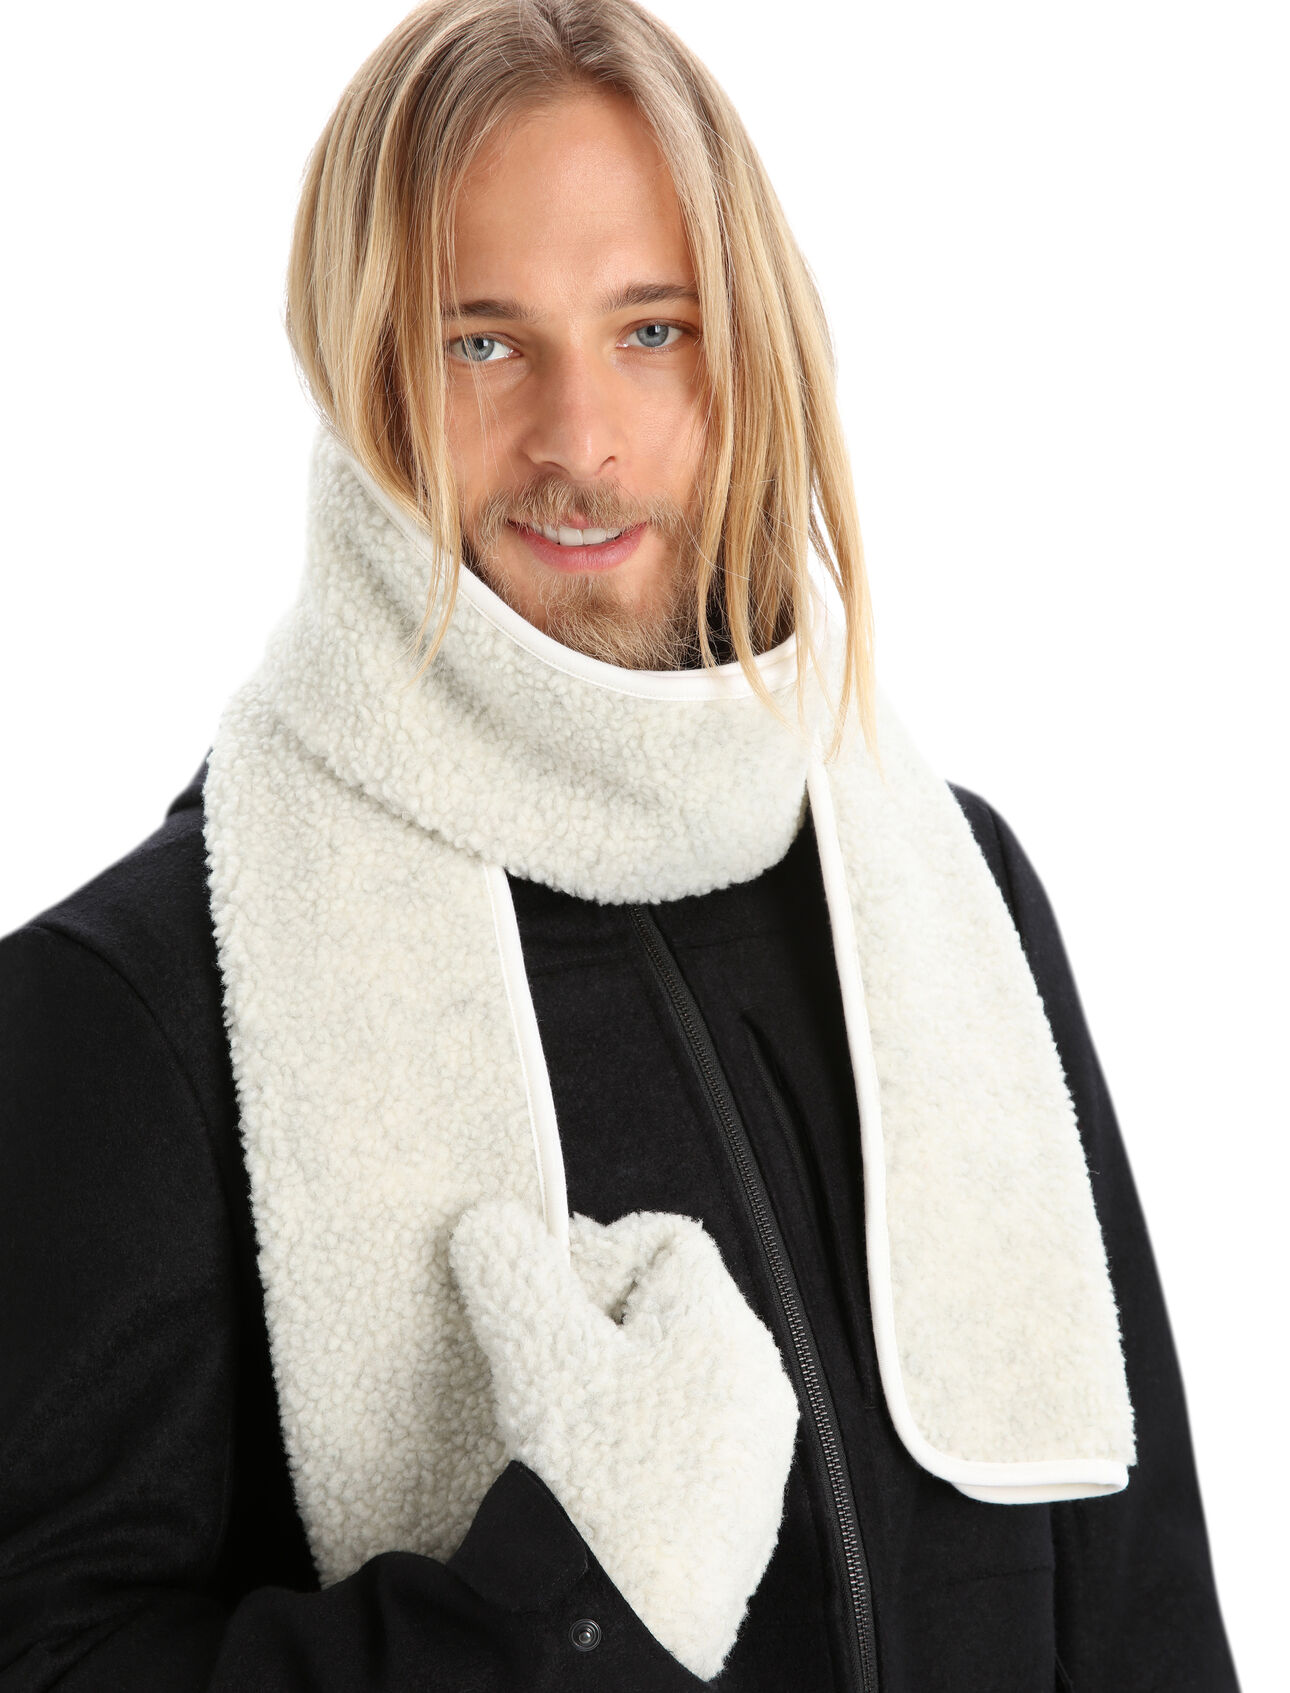 Unisex RealFleece™ Merino High Pile Scarf A super-cozy scarf ideal for super-cold days, the RealFleece™ High Pile Scarf features high-loft merino wool fleece and a soft merino jersey backer for the ultimate in winter warmth.